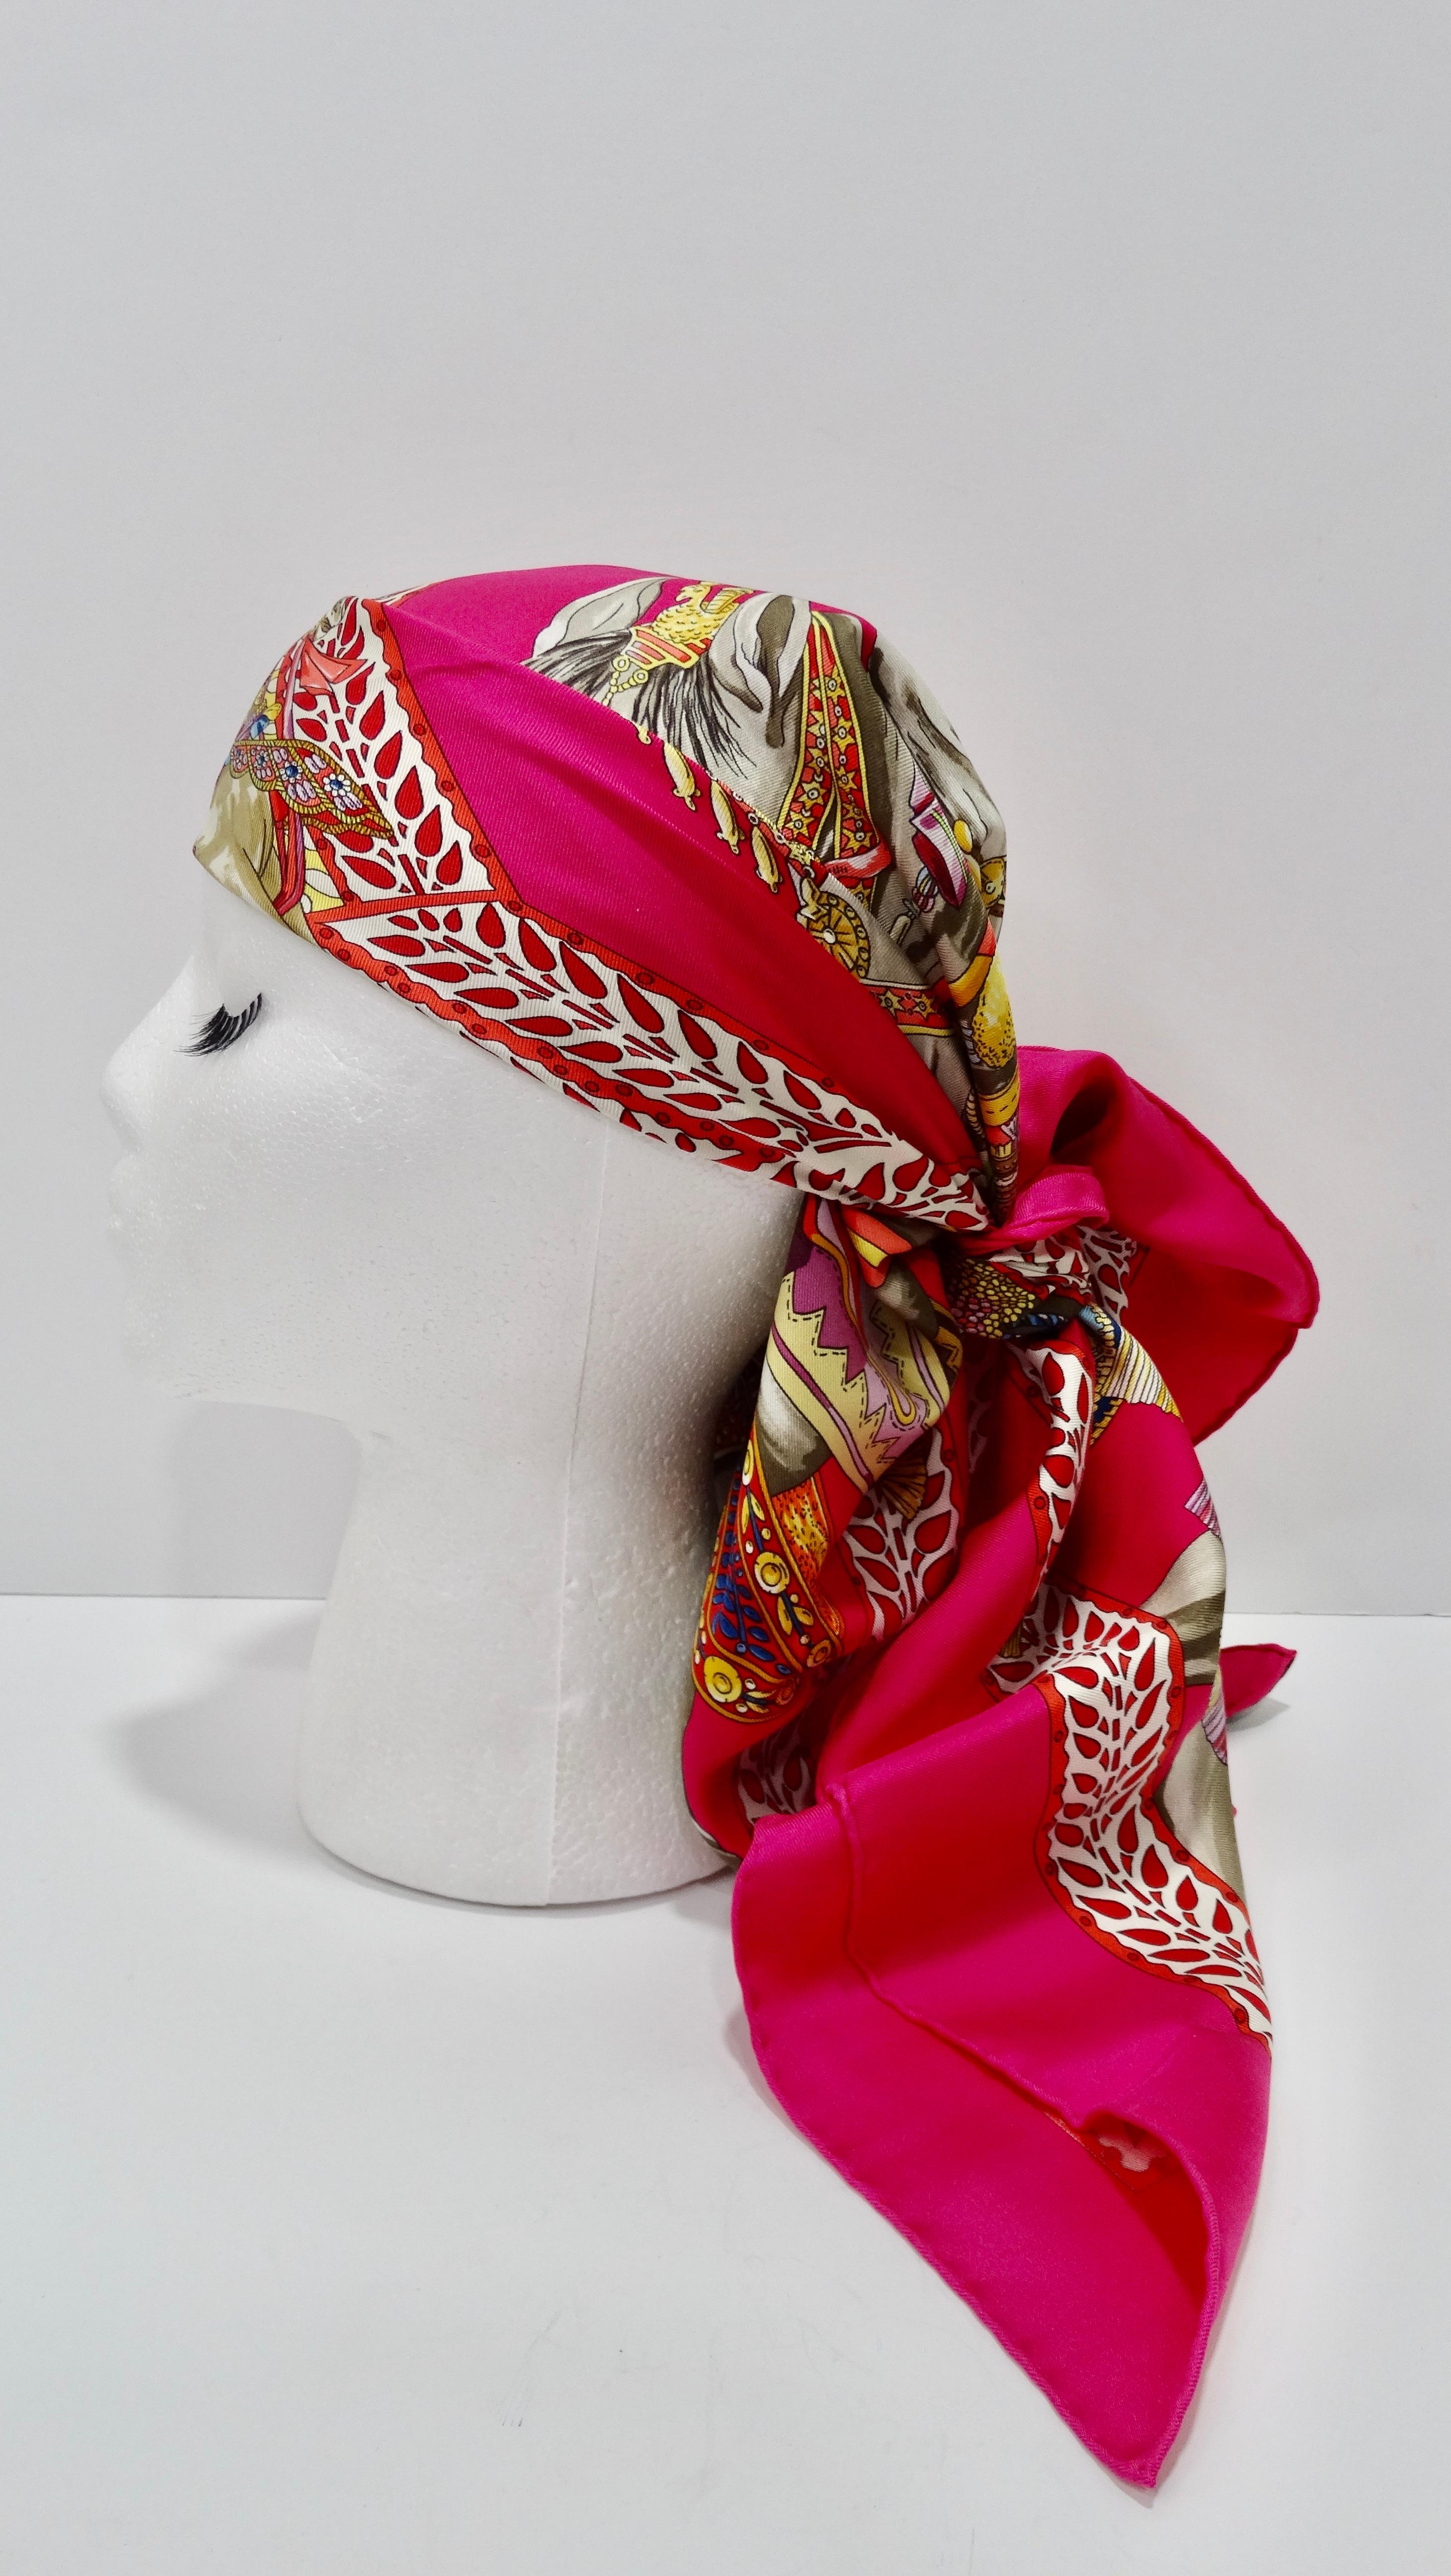 Designed by Annie Faivre in 2008, this striking pink scarf features a detailed motif titled 